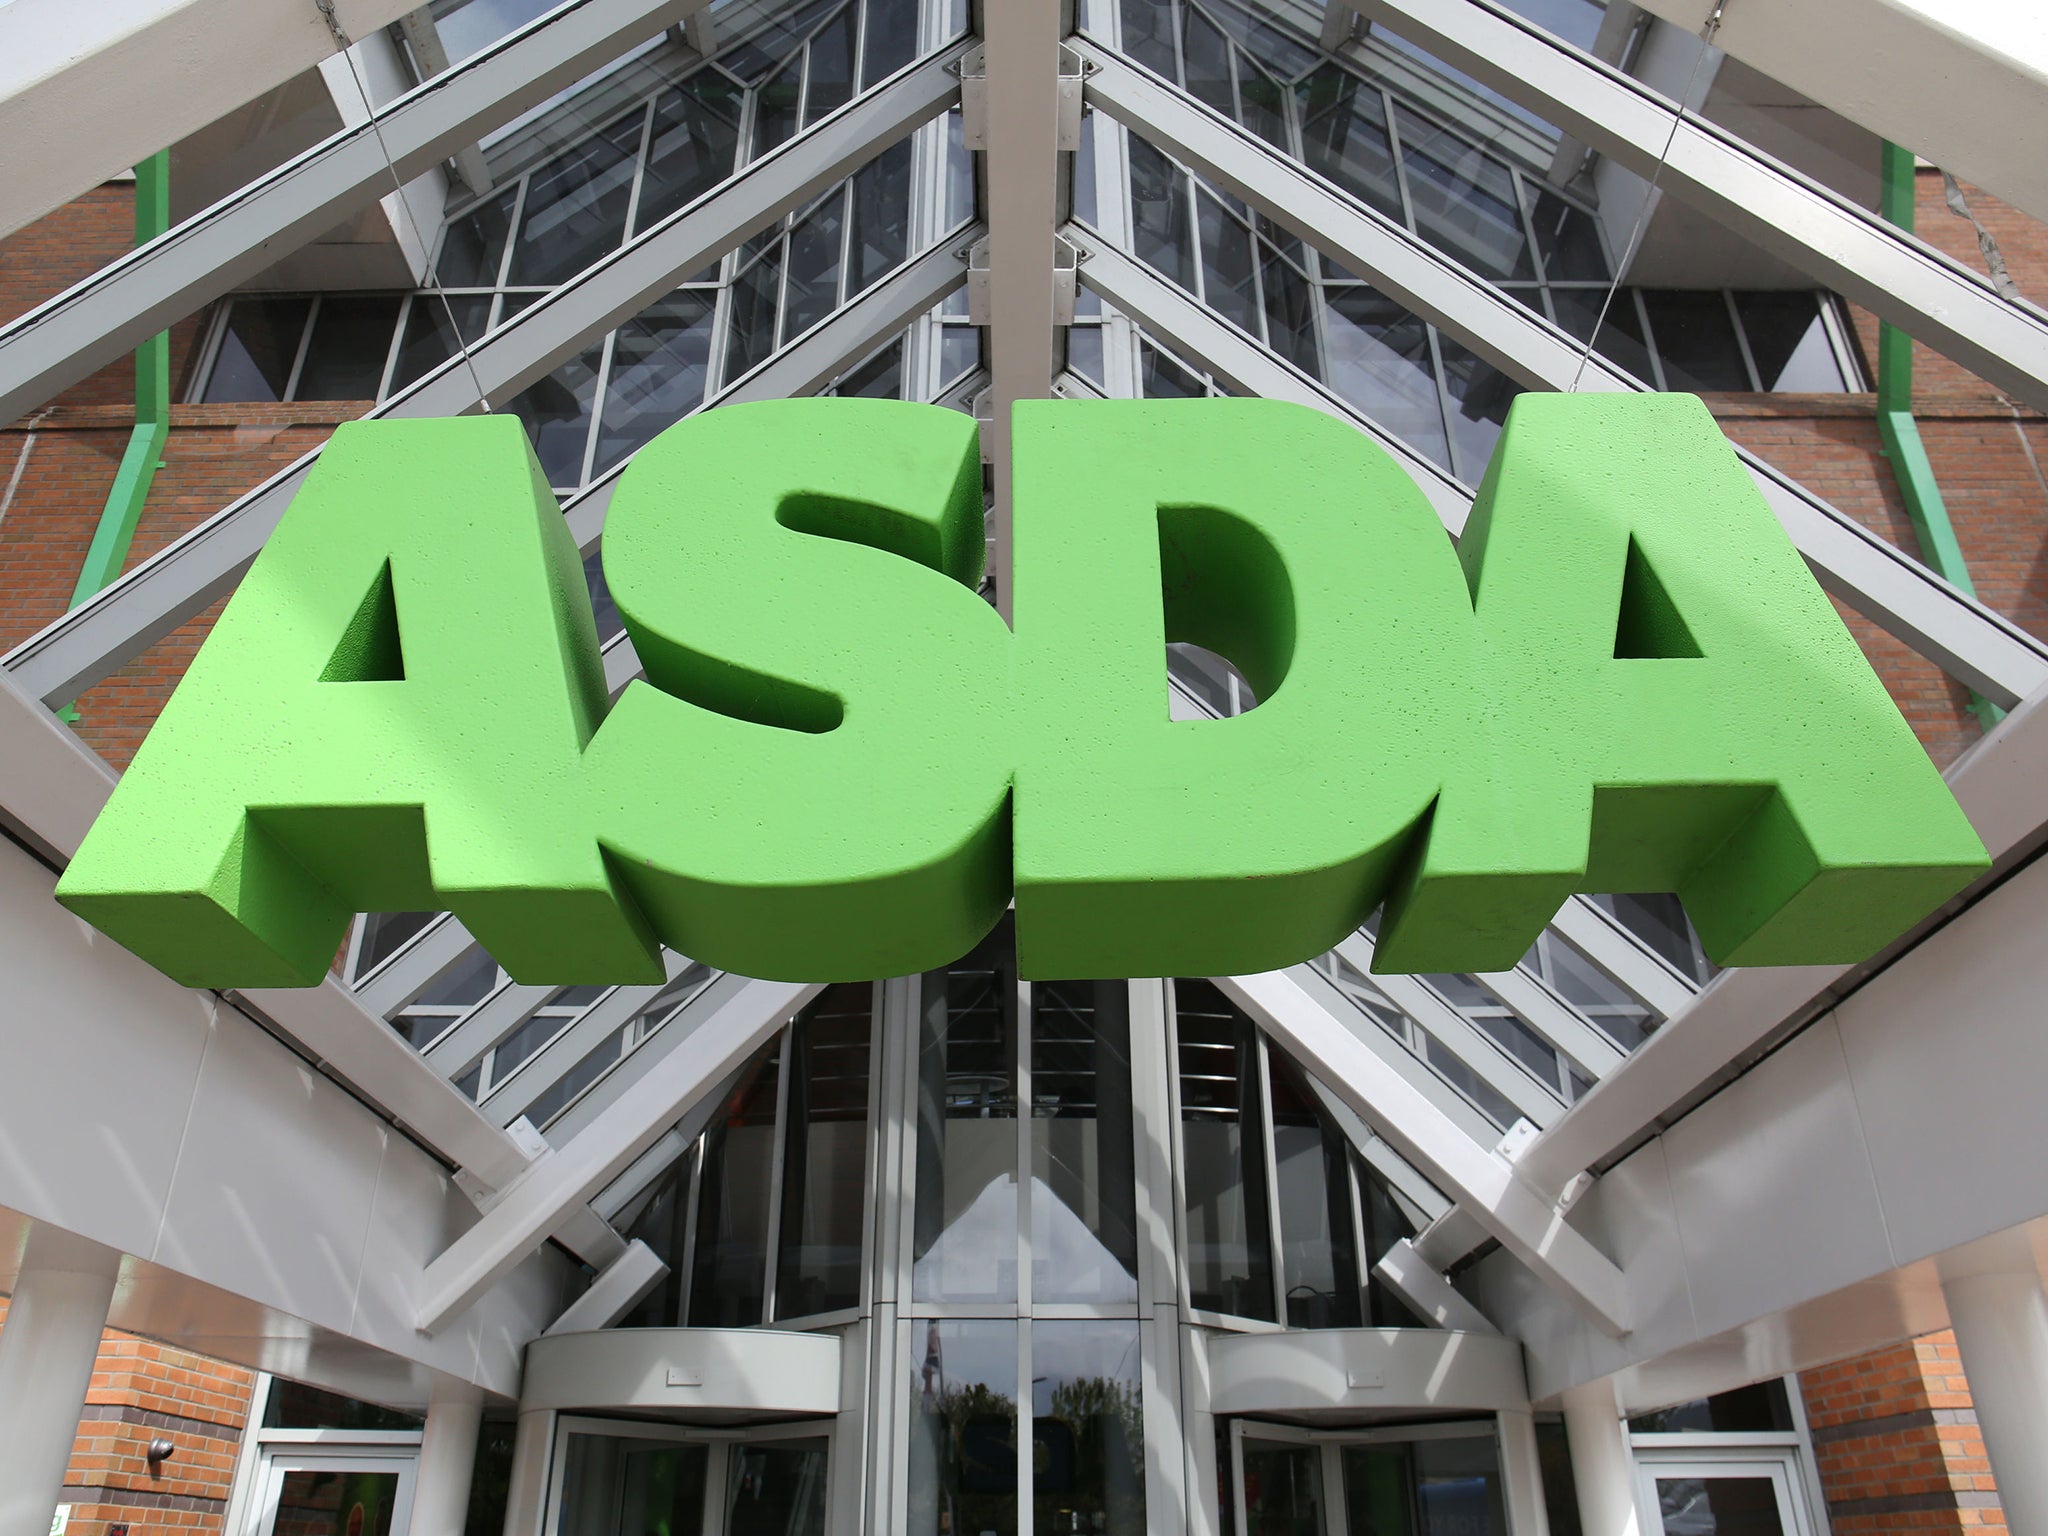 Asda has had to cope with more expensive food imports since the vote for Brexit